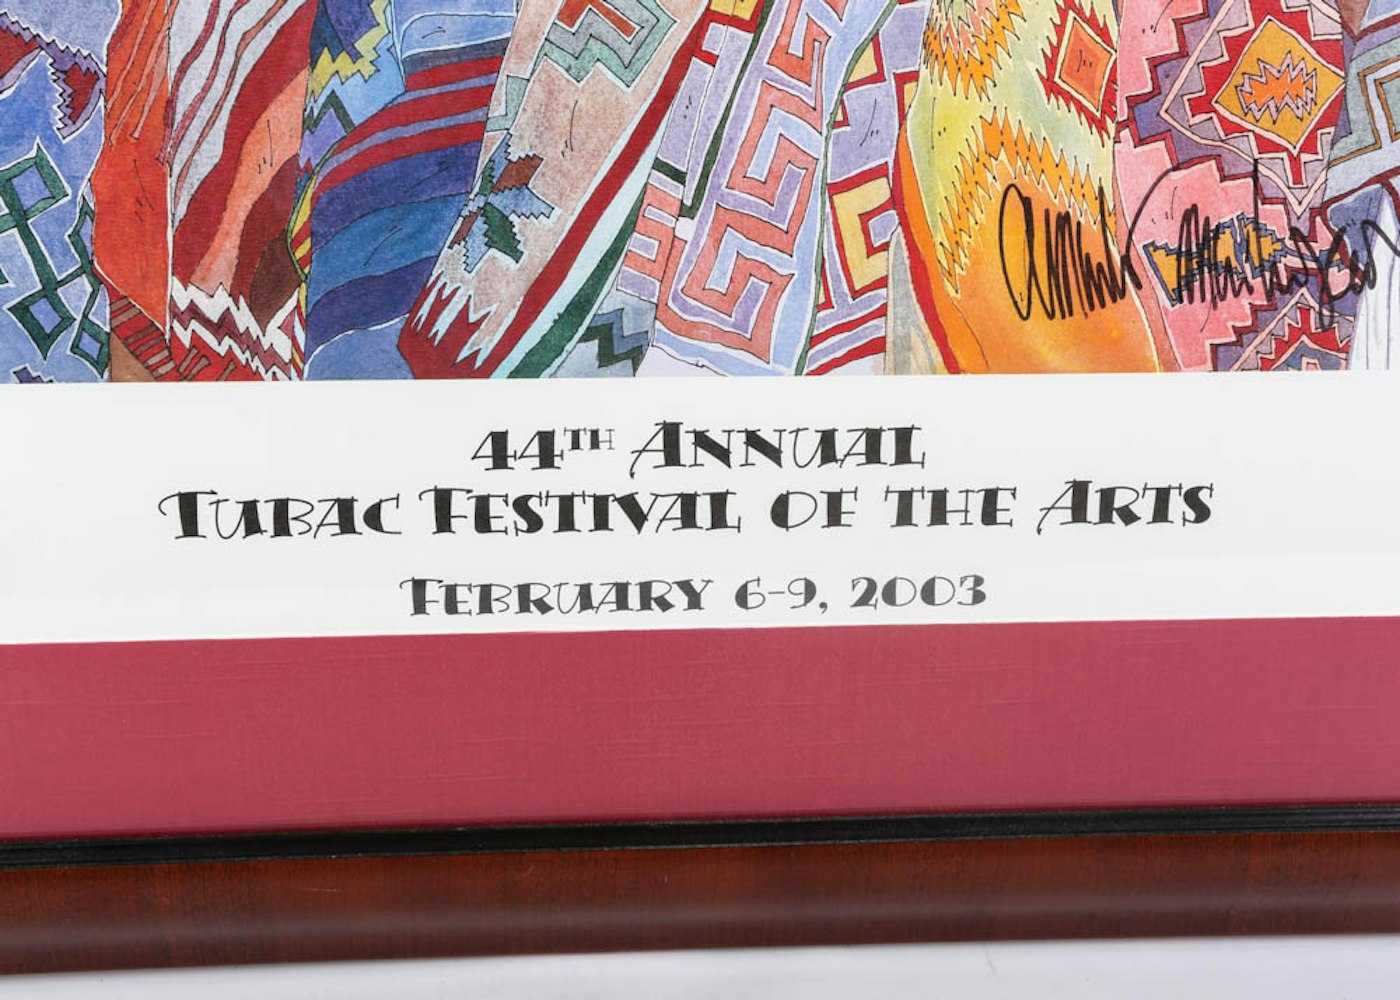 Signed Tubac Festival of the Arts Poster by Amado Pena EBTH